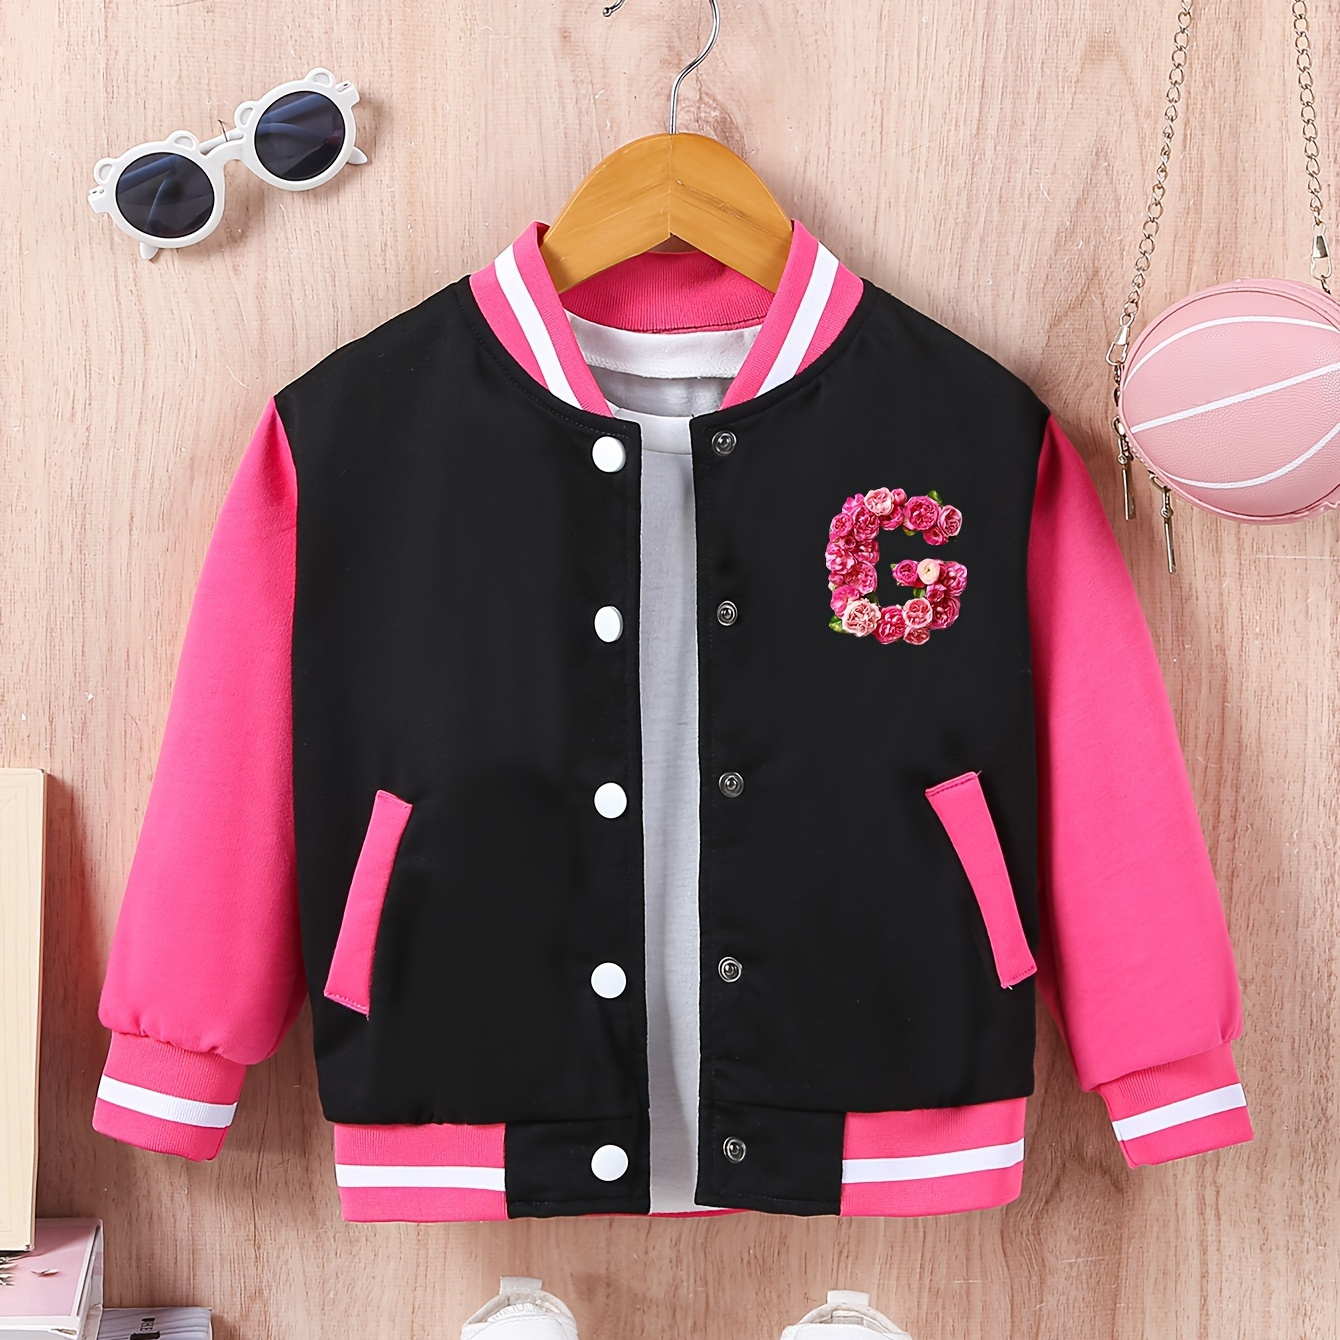 

Girls' Varsity-style Floral Letter G Bomber Jacket, Fashionable Spring/fall Outerwear, Striped Trim